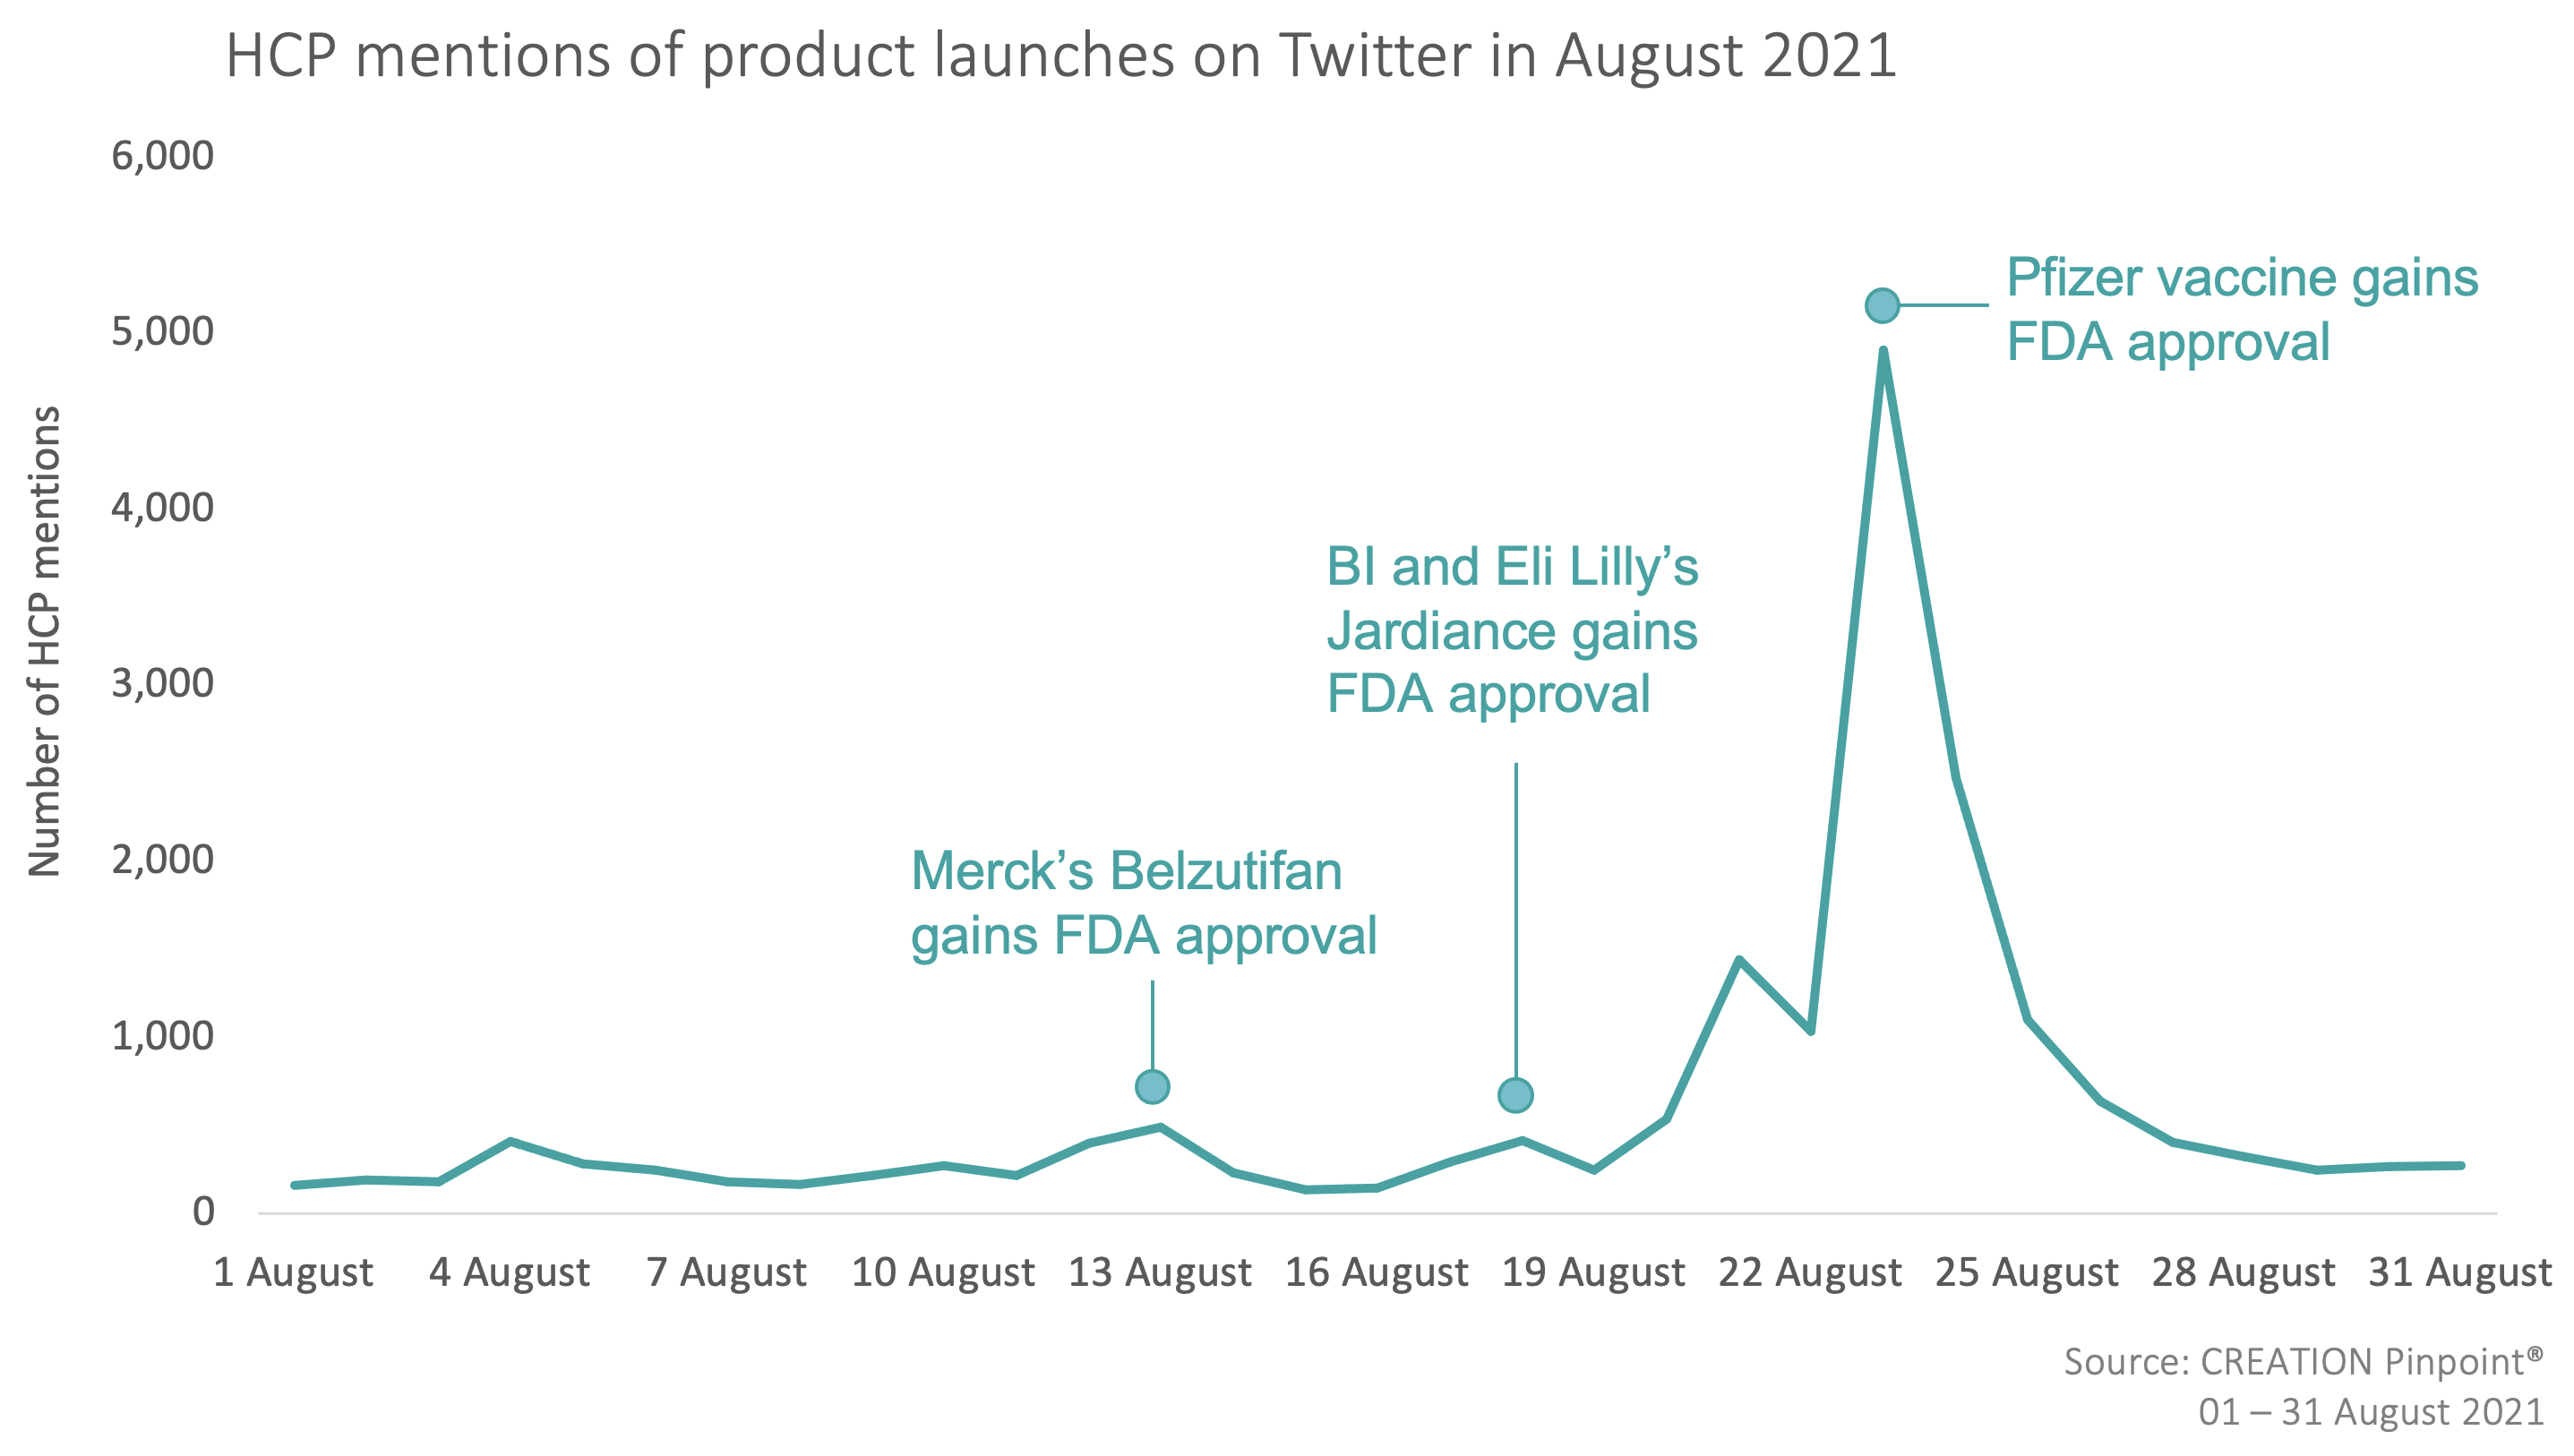 A graph showing HCP mentions of product launches on Twitter in August 2021